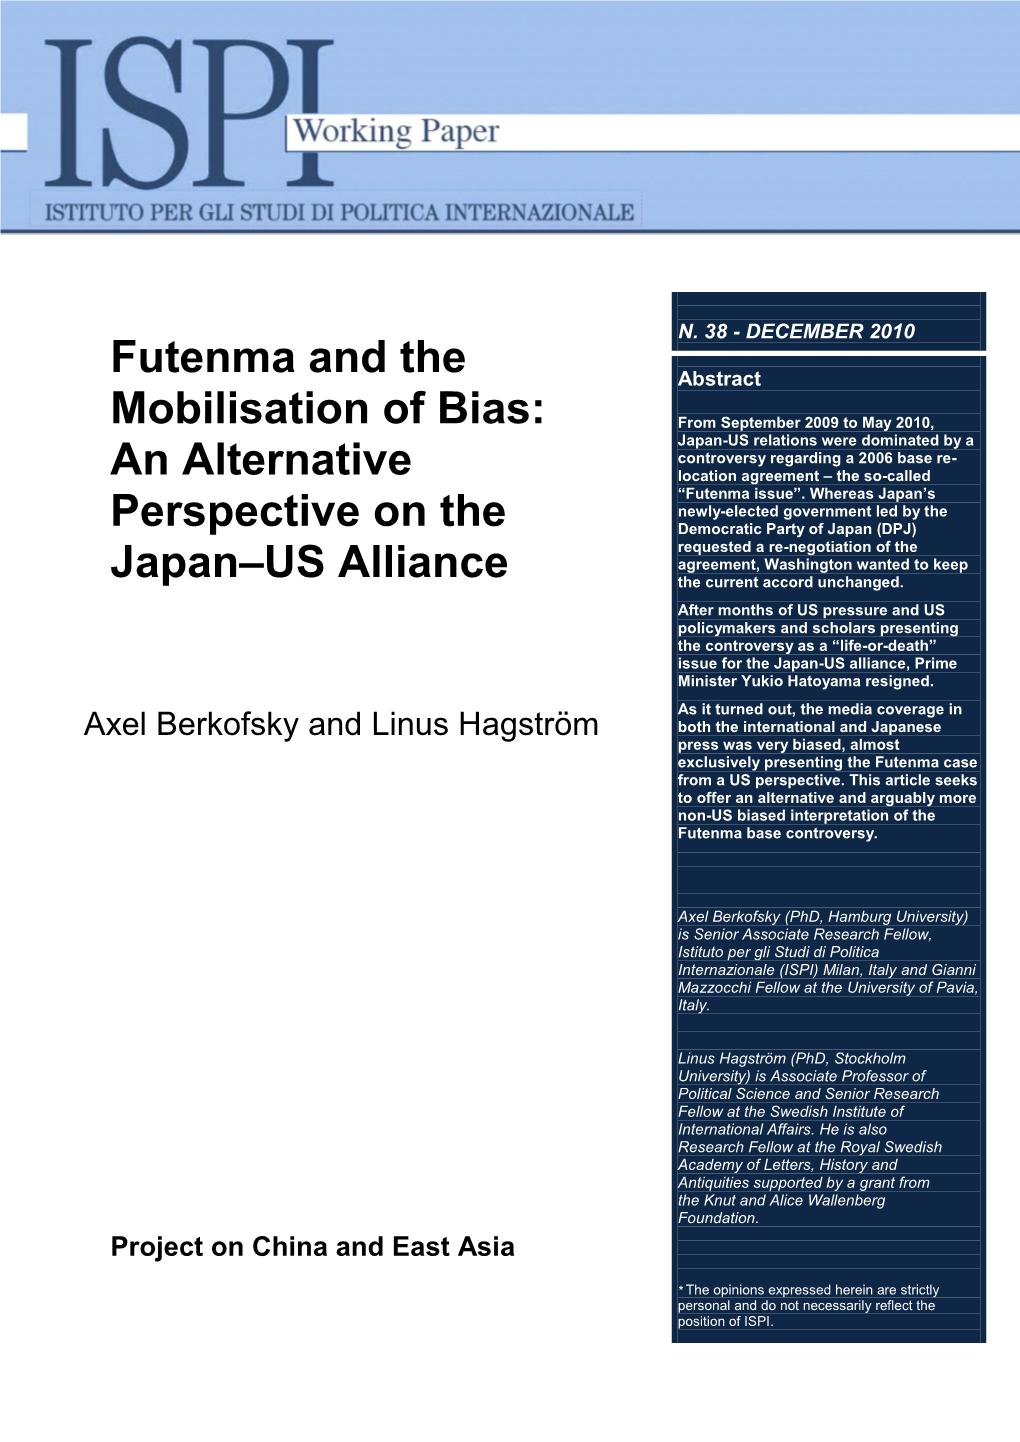 Futenma and the Mobilisation of Bias